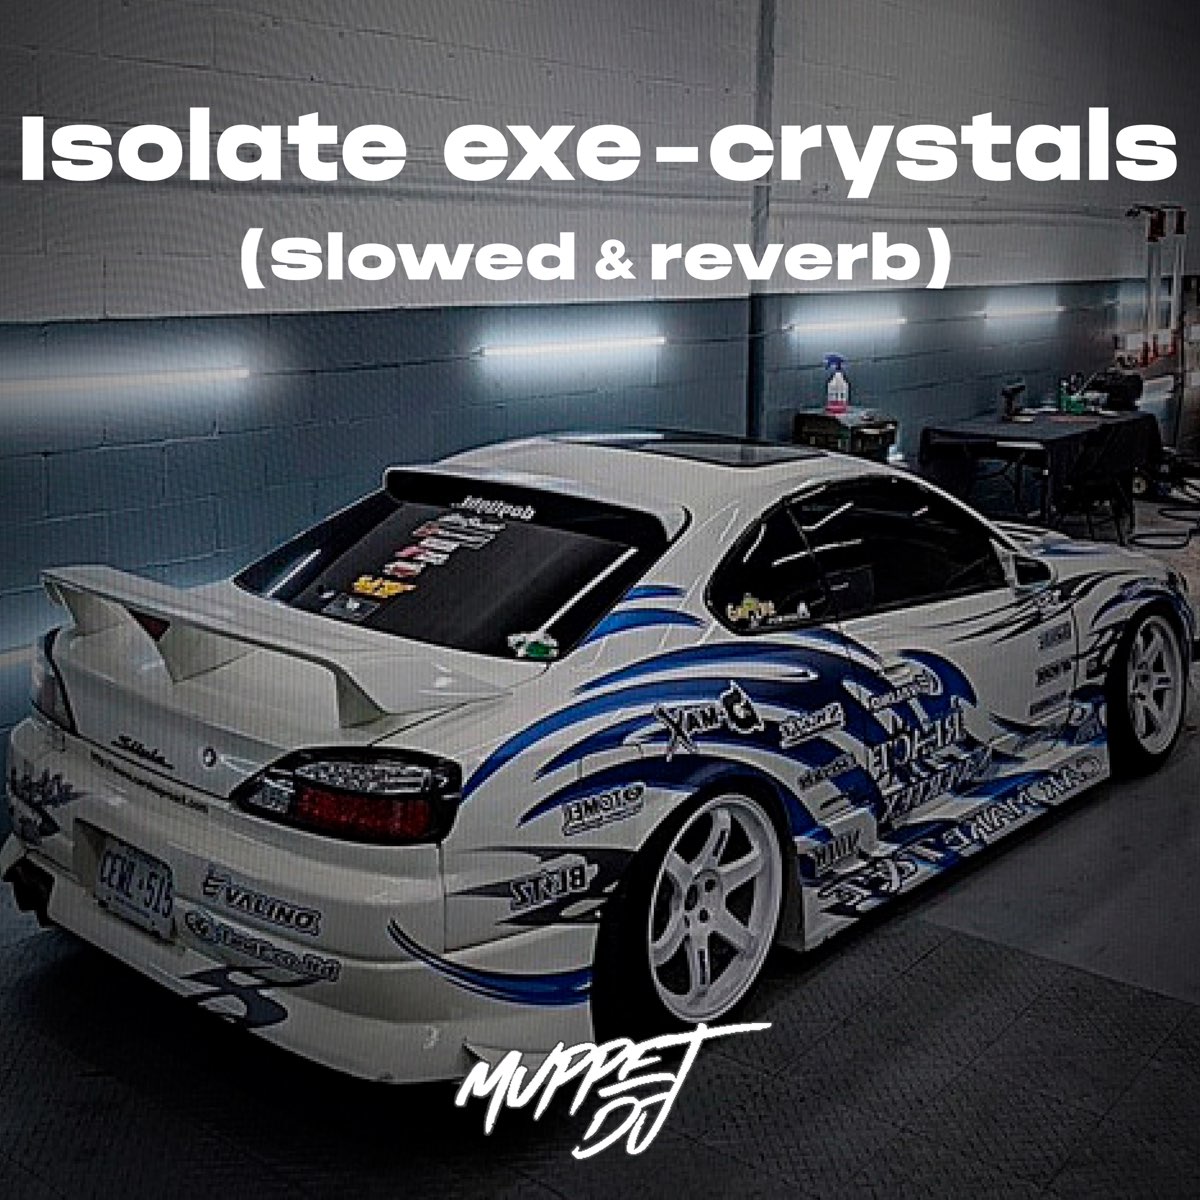 Crystals slowed pr1svx. Crystals isolate.exe. Isolate exe. Isolate.exe - Crystals (Slowed € Reverb). Crystal exe.